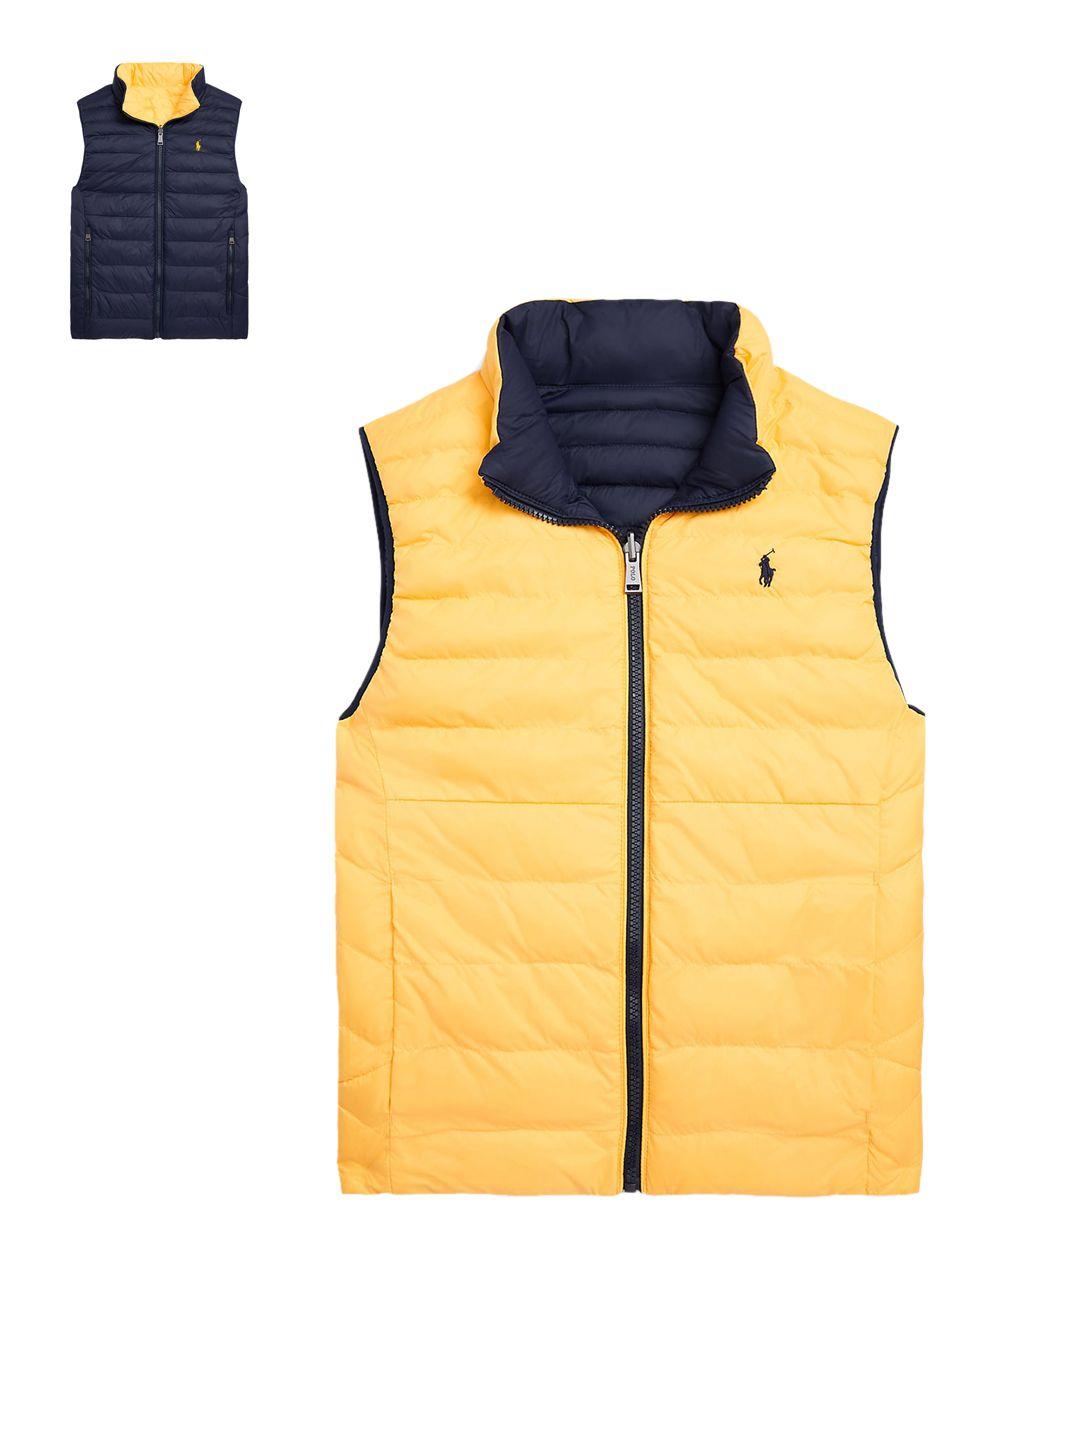 polo ralph lauren boys quilted reversible puffer jacket